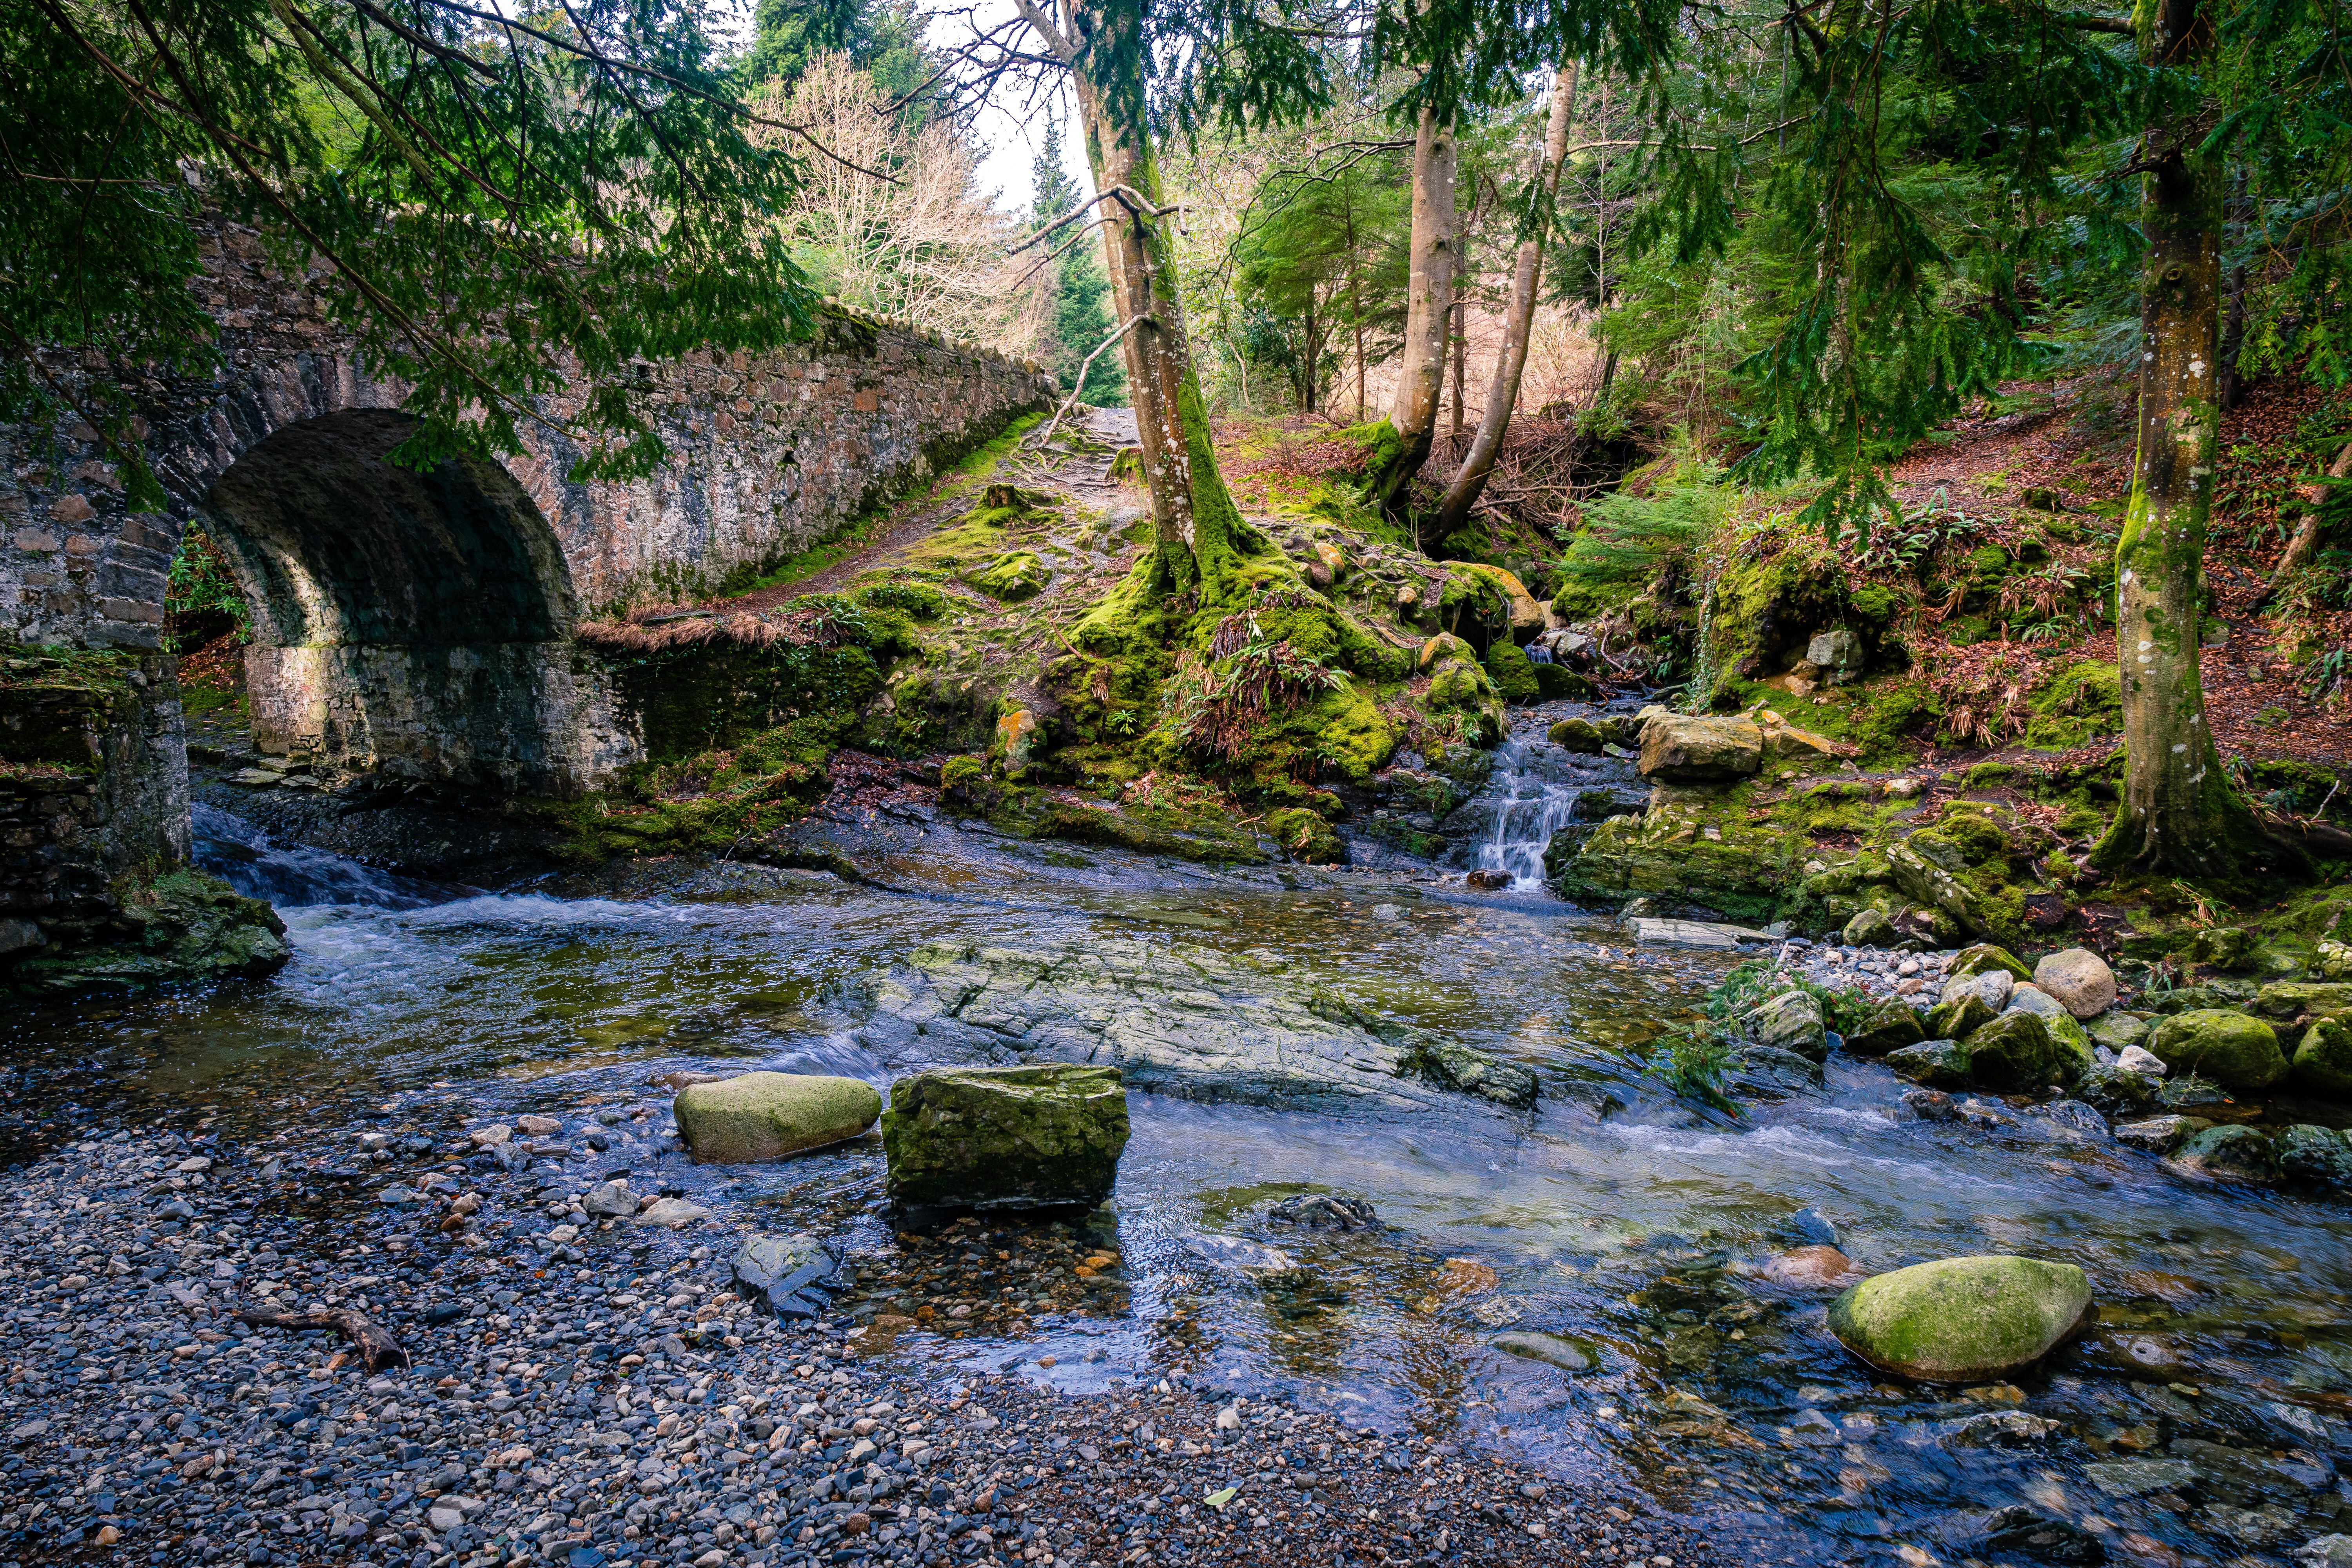 Film location in Tollymore National Park (Alamy/PA)